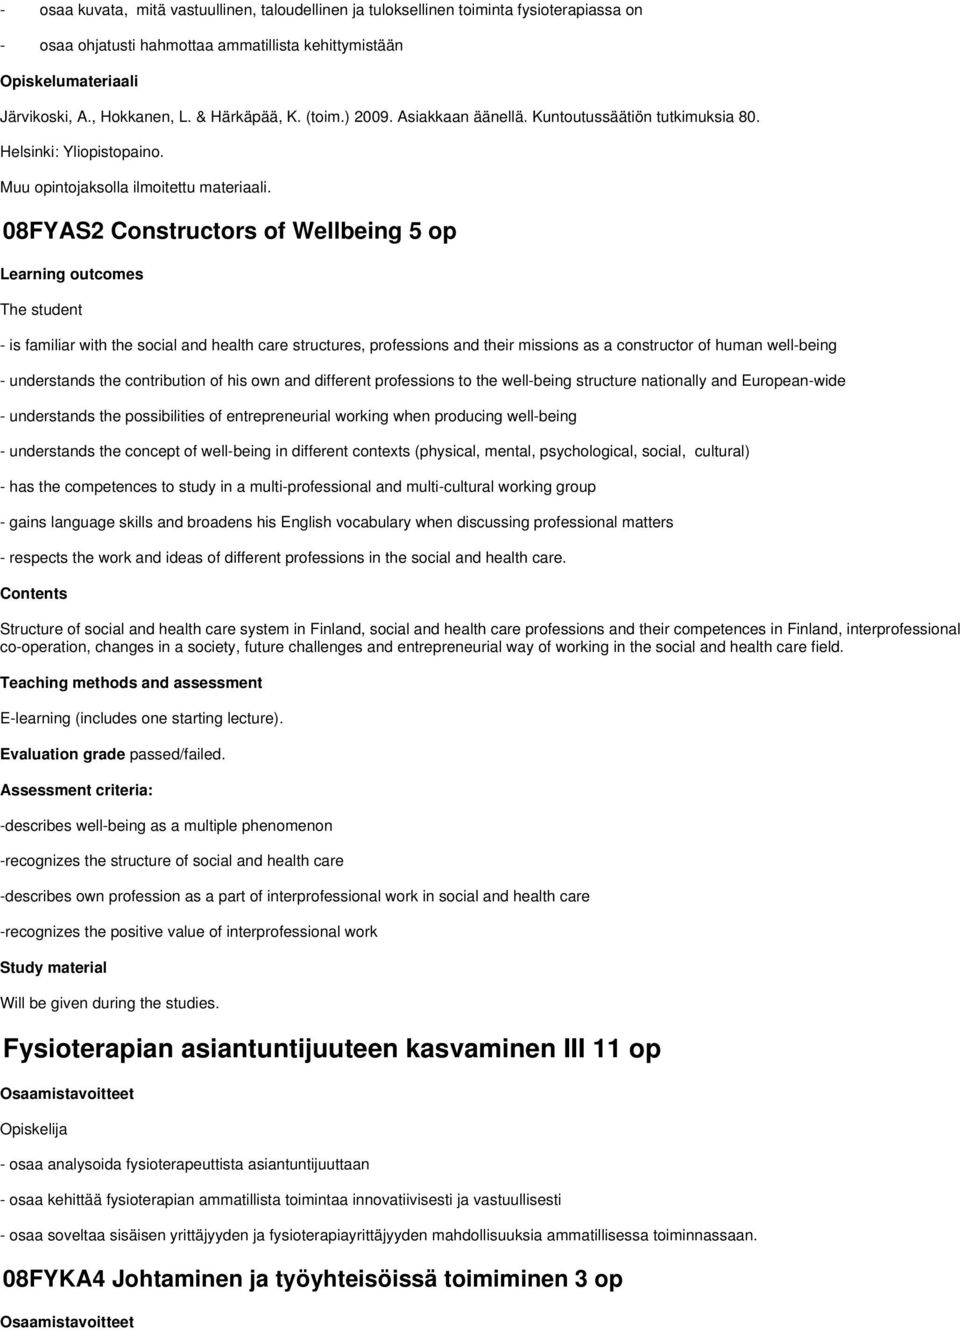 08FYAS2 Constructors of Wellbeing 5 op Learning outcomes The student - is familiar with the social and health care structures, professions and their missions as a constructor of human well-being -